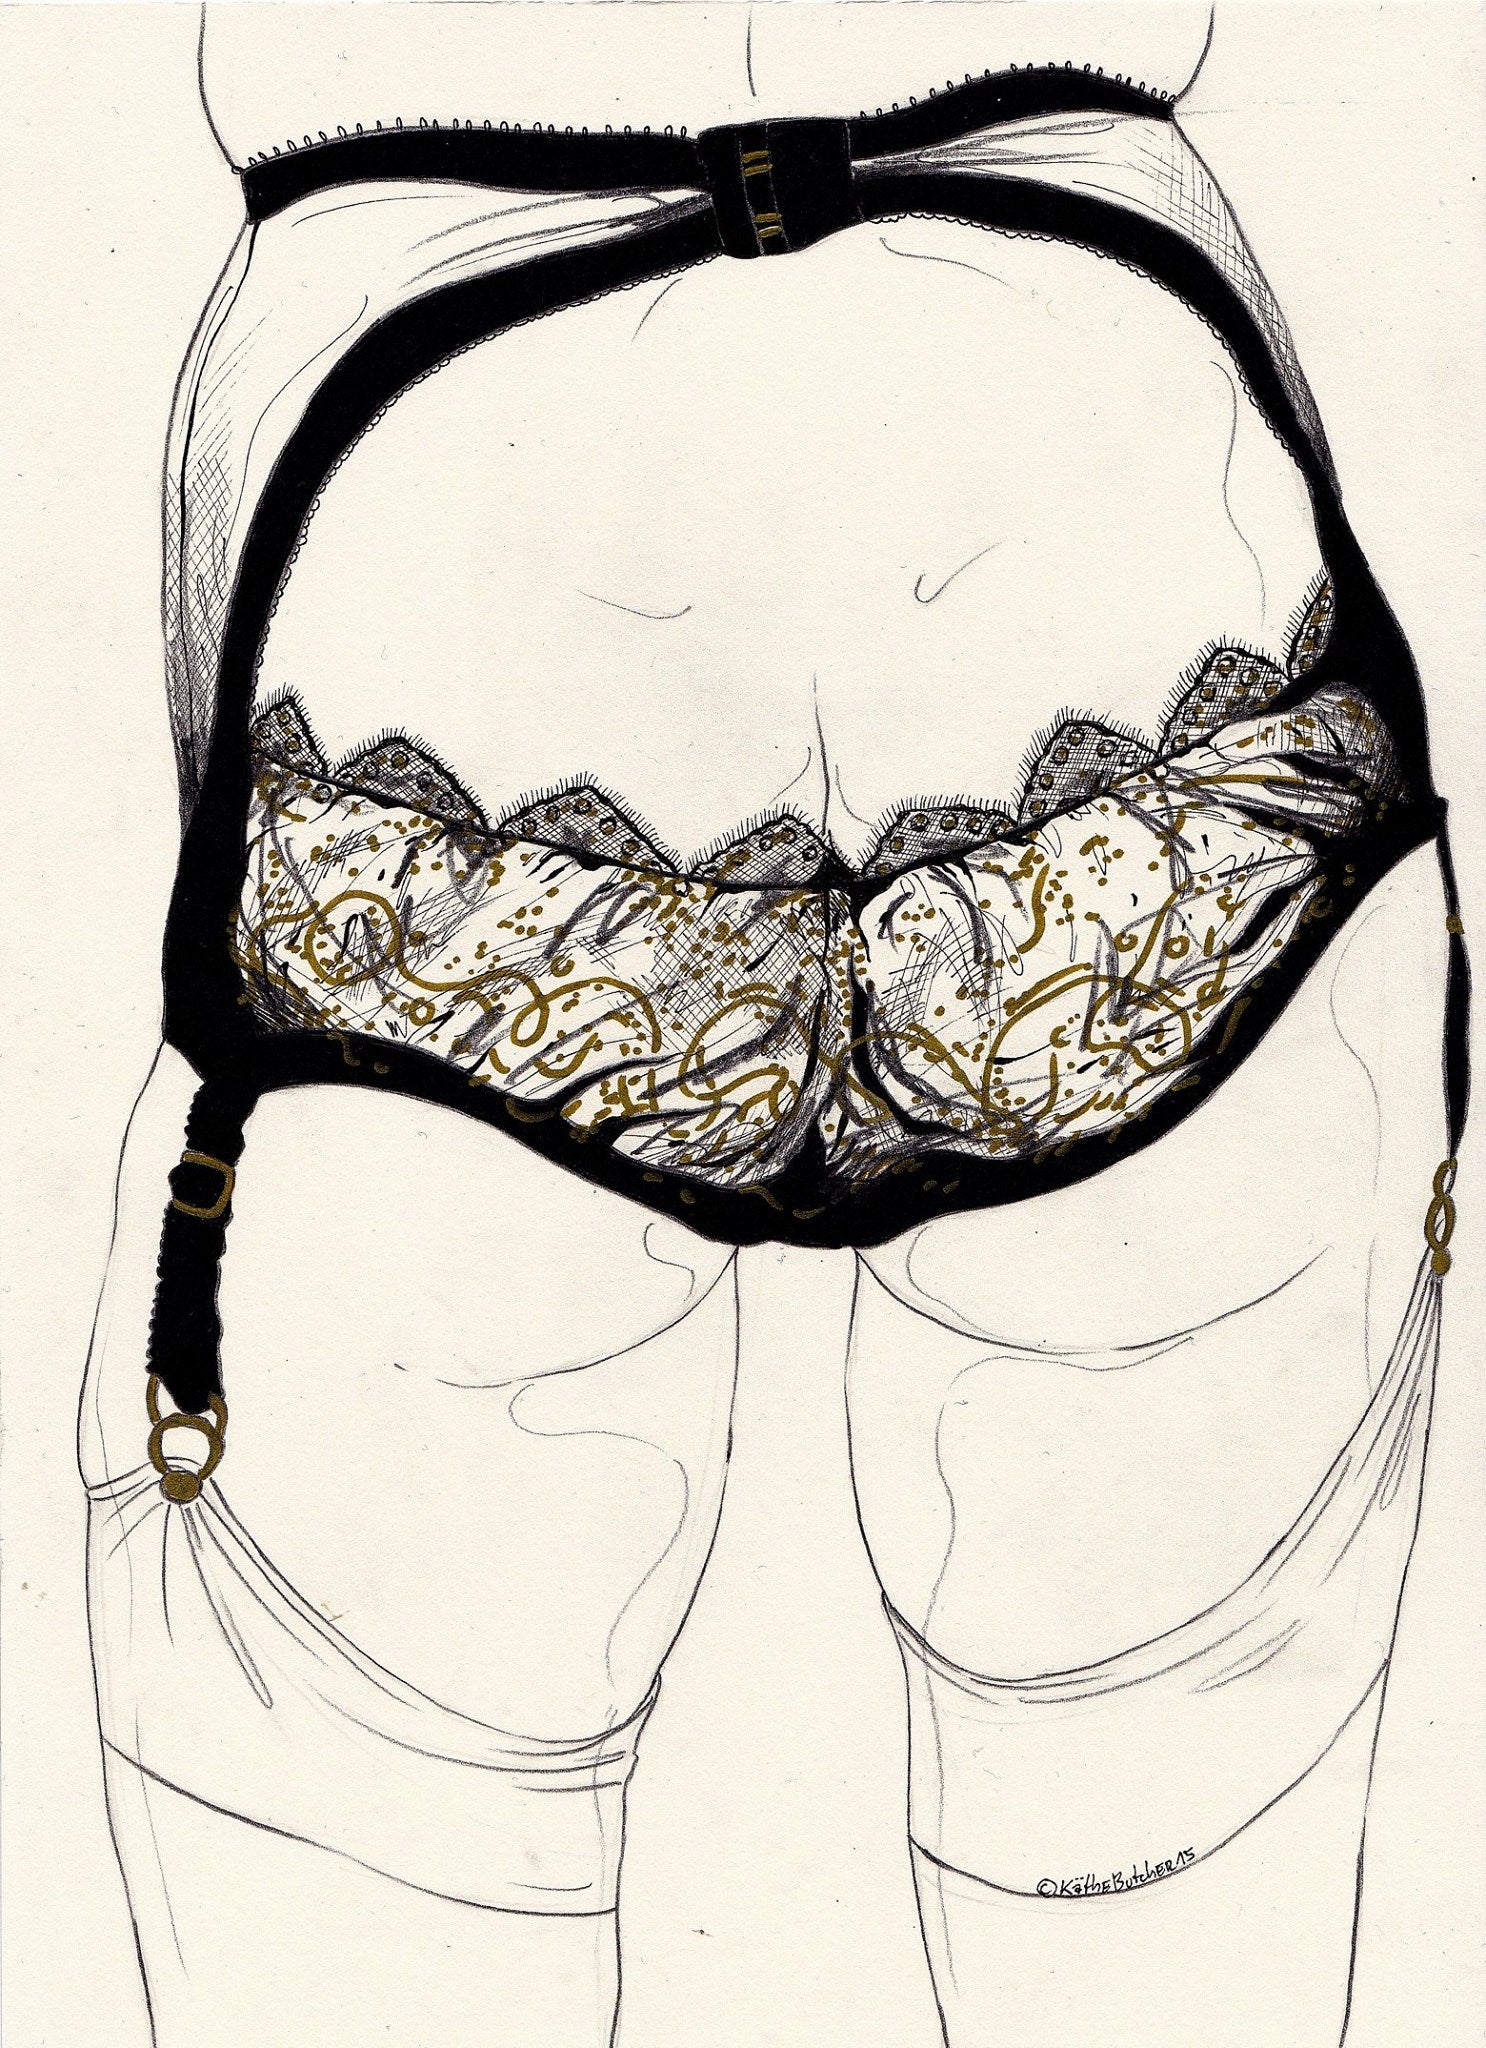 Illustration of Edge o' Beyond Luxury Lingerie with gilt thread detailing in lace